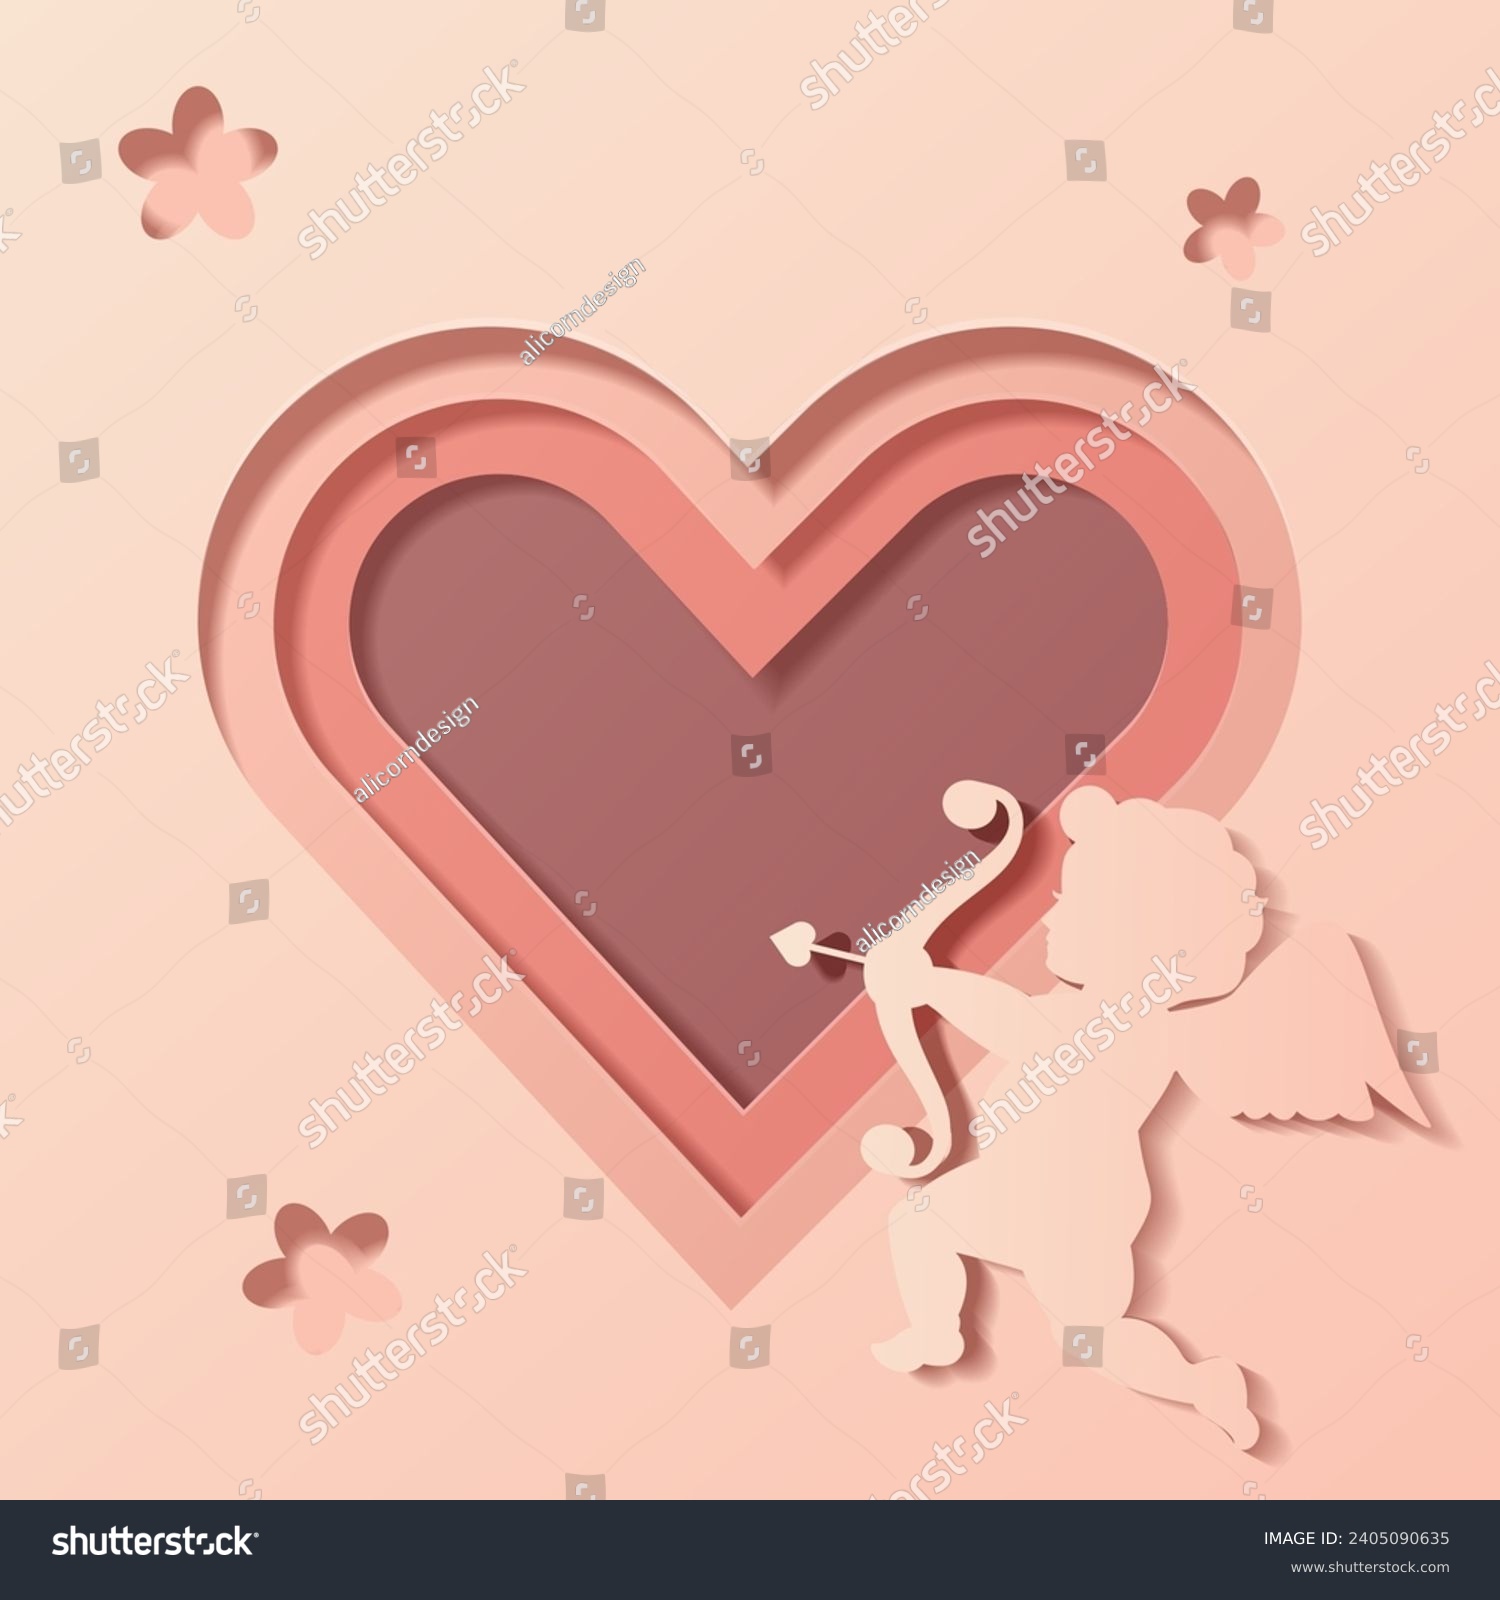 SVG of Valentine's day background of heart shape heats and cupid , paper cut. Concept of love and Valentine day, paper art style svg